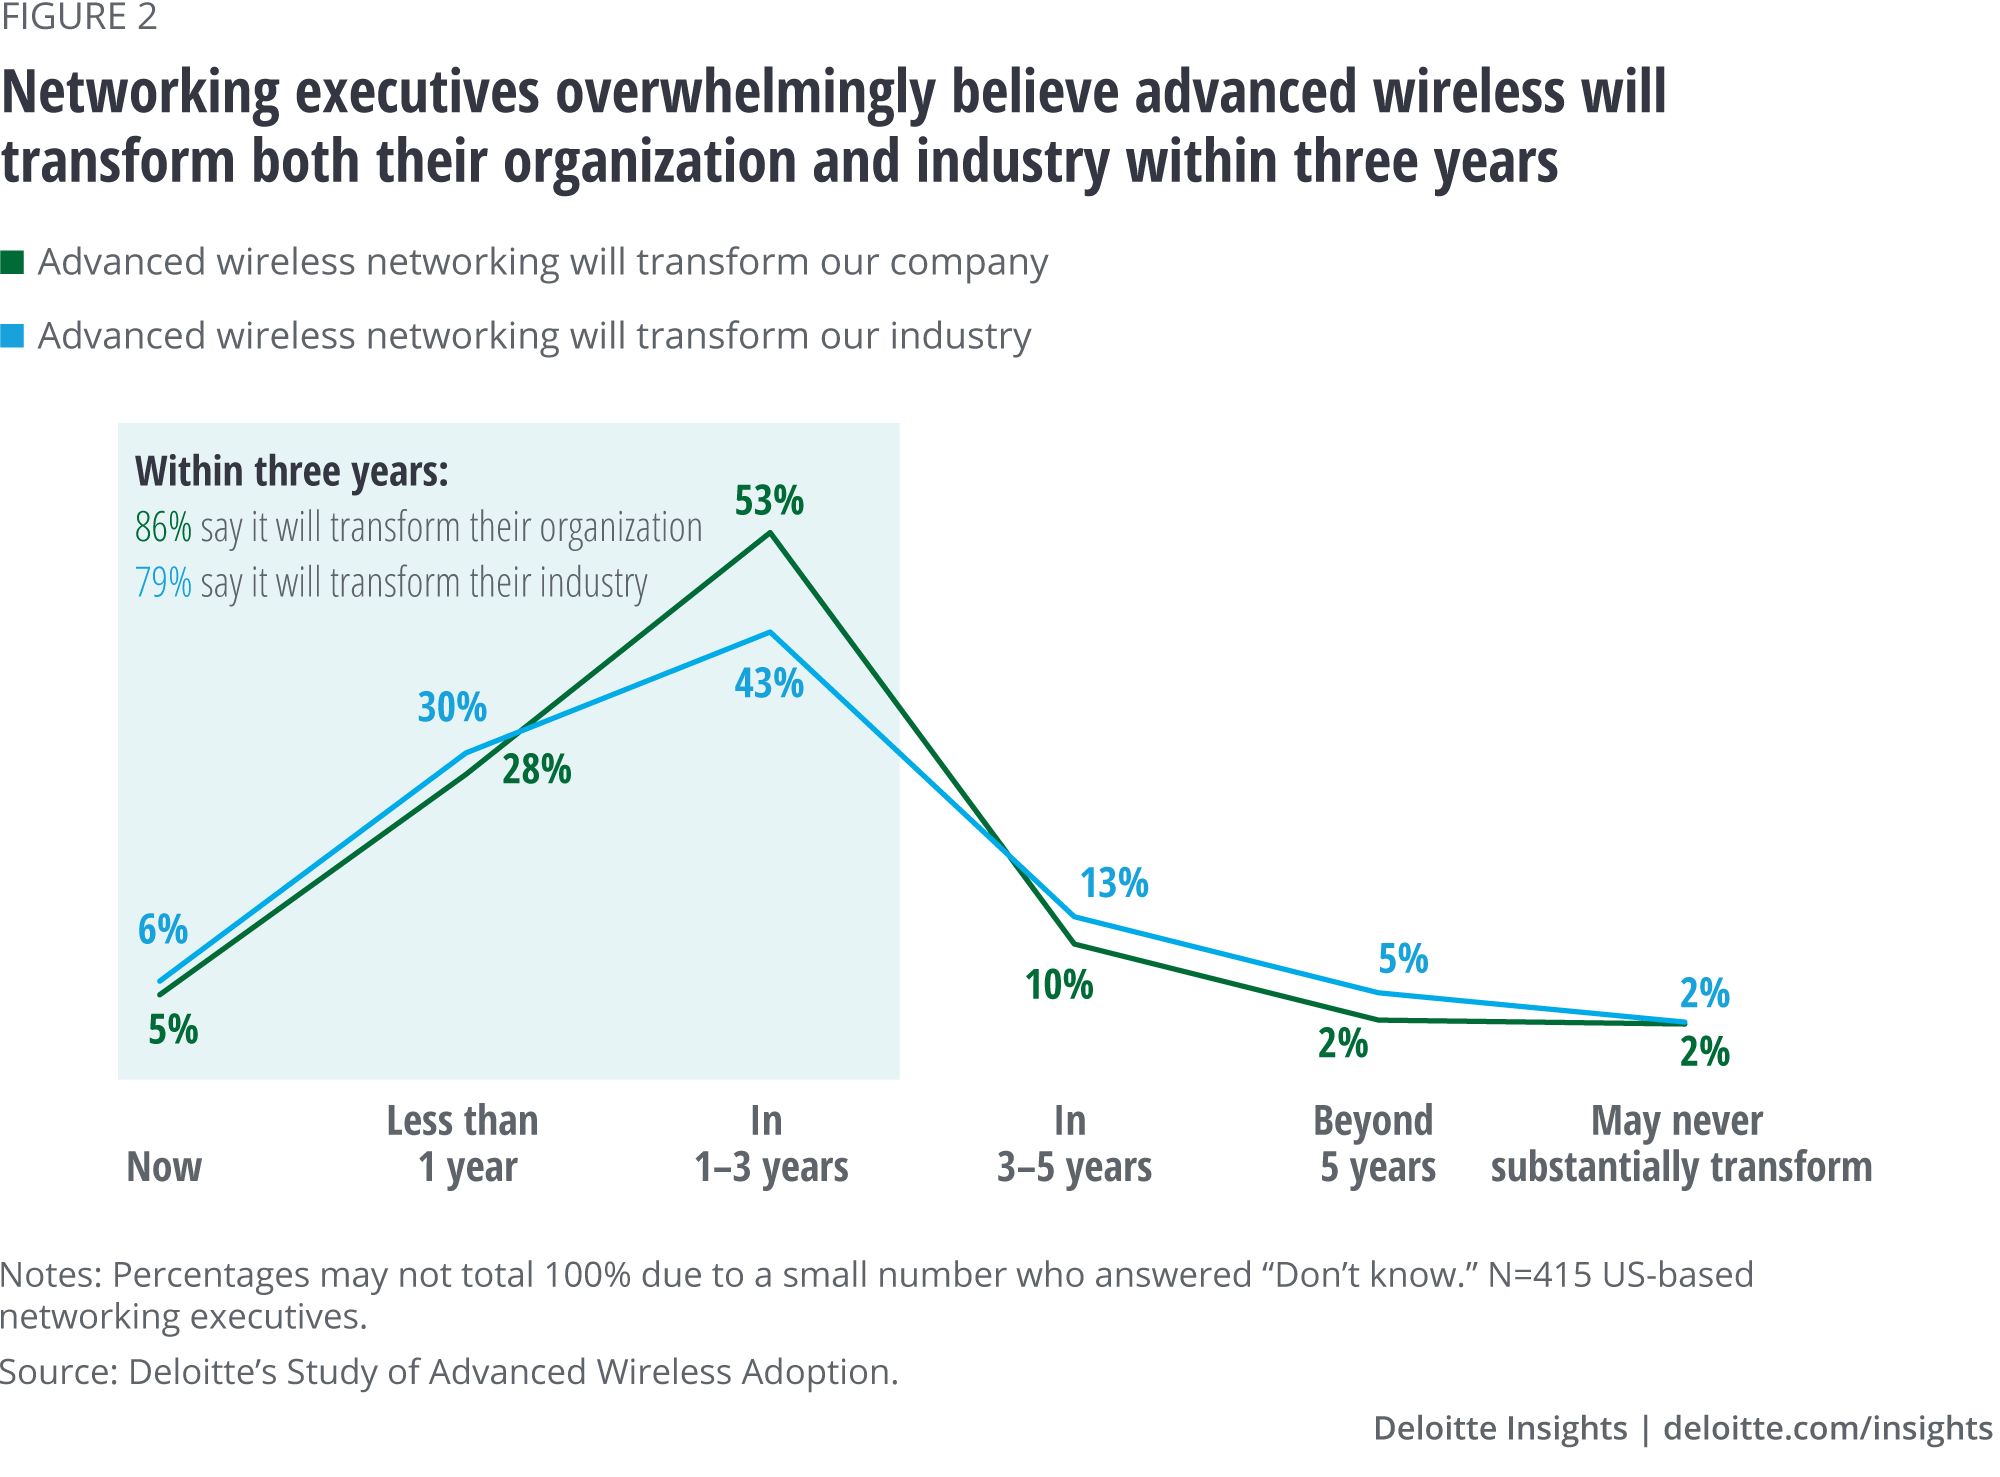 Networking executives overwhelmingly believe advanced wireless will transform both their organization and industry within three years